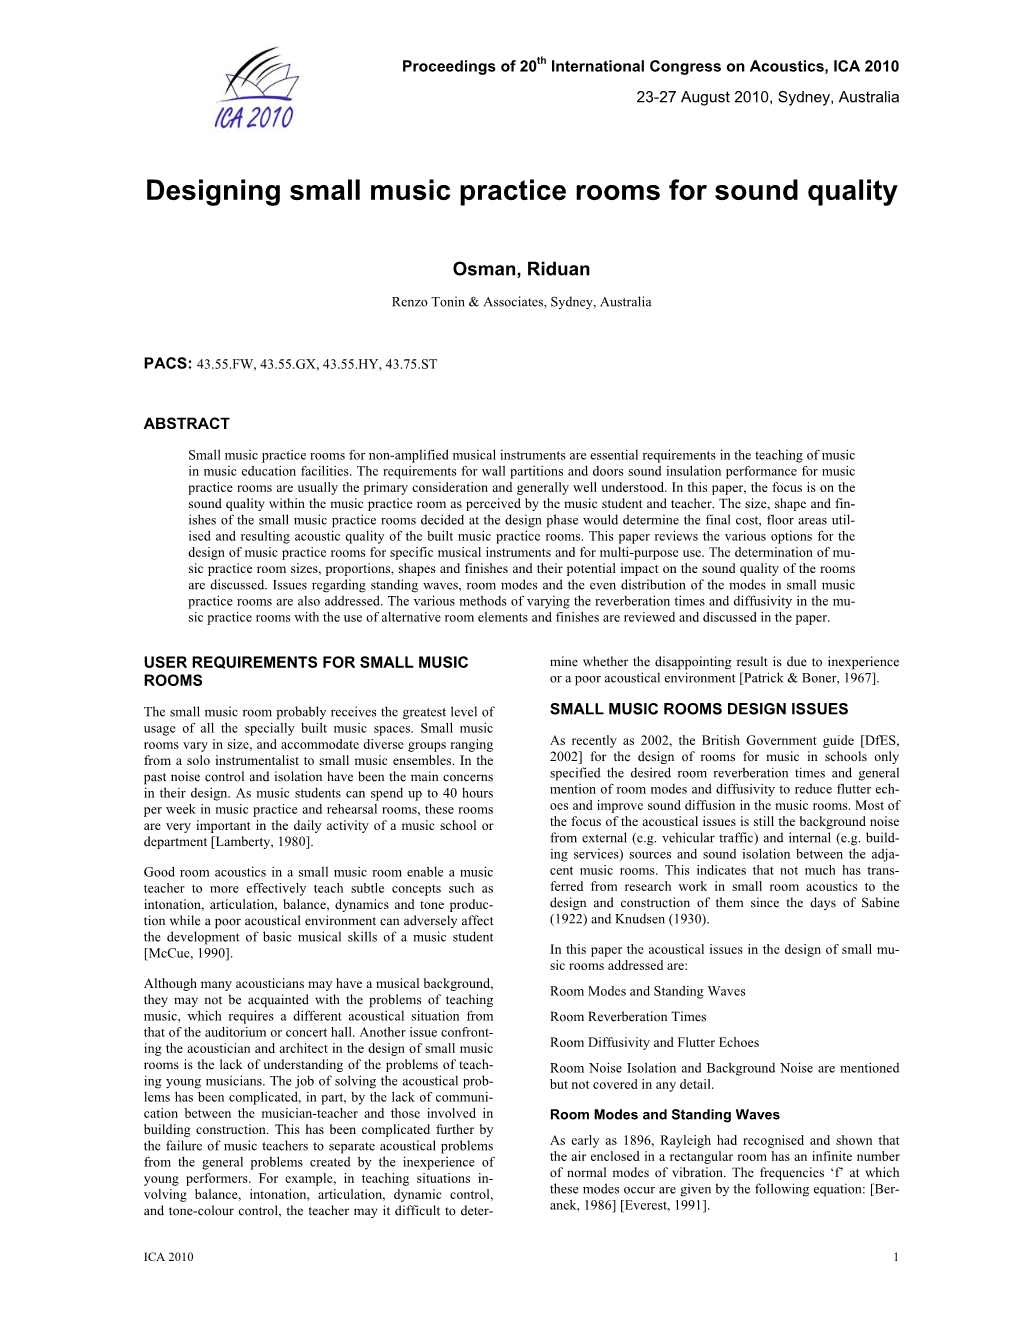 Designing Small Music Practice Rooms for Sound Quality